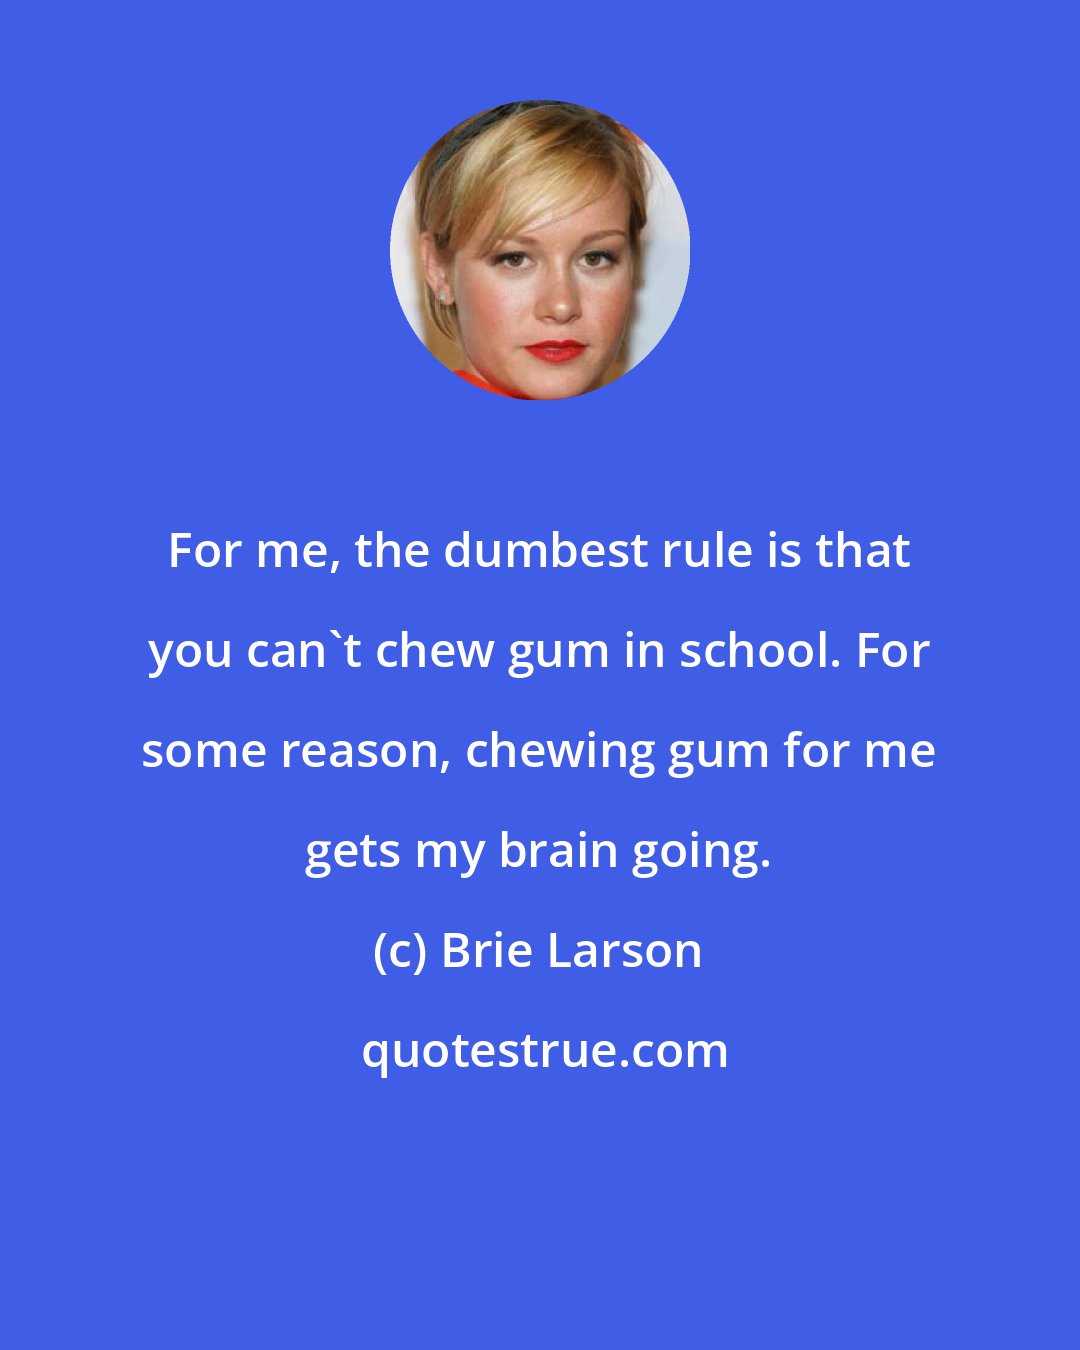 Brie Larson: For me, the dumbest rule is that you can't chew gum in school. For some reason, chewing gum for me gets my brain going.